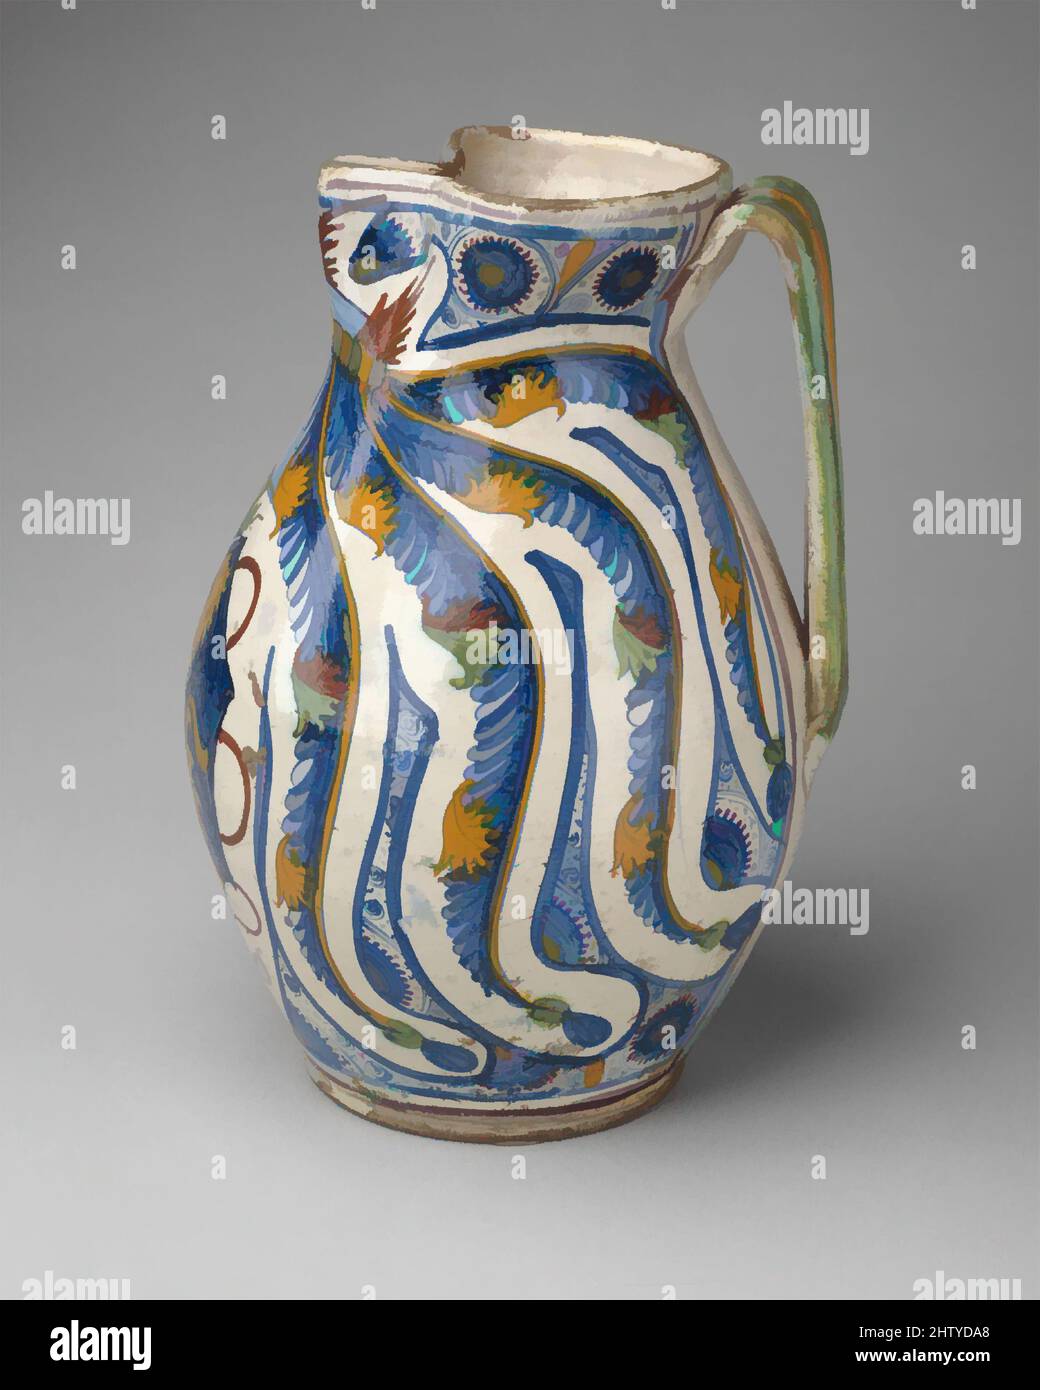 Art inspired by Armorial Jug (boccale), 1506, Italian, Tuscany, Cafaggiolo or Montelupo, Maiolica (tin-glazed earthenware), H. 13 9/16 in. (34.5 cm), Ceramics-Pottery, Classic works modernized by Artotop with a splash of modernity. Shapes, color and value, eye-catching visual impact on art. Emotions through freedom of artworks in a contemporary way. A timeless message pursuing a wildly creative new direction. Artists turning to the digital medium and creating the Artotop NFT Stock Photo